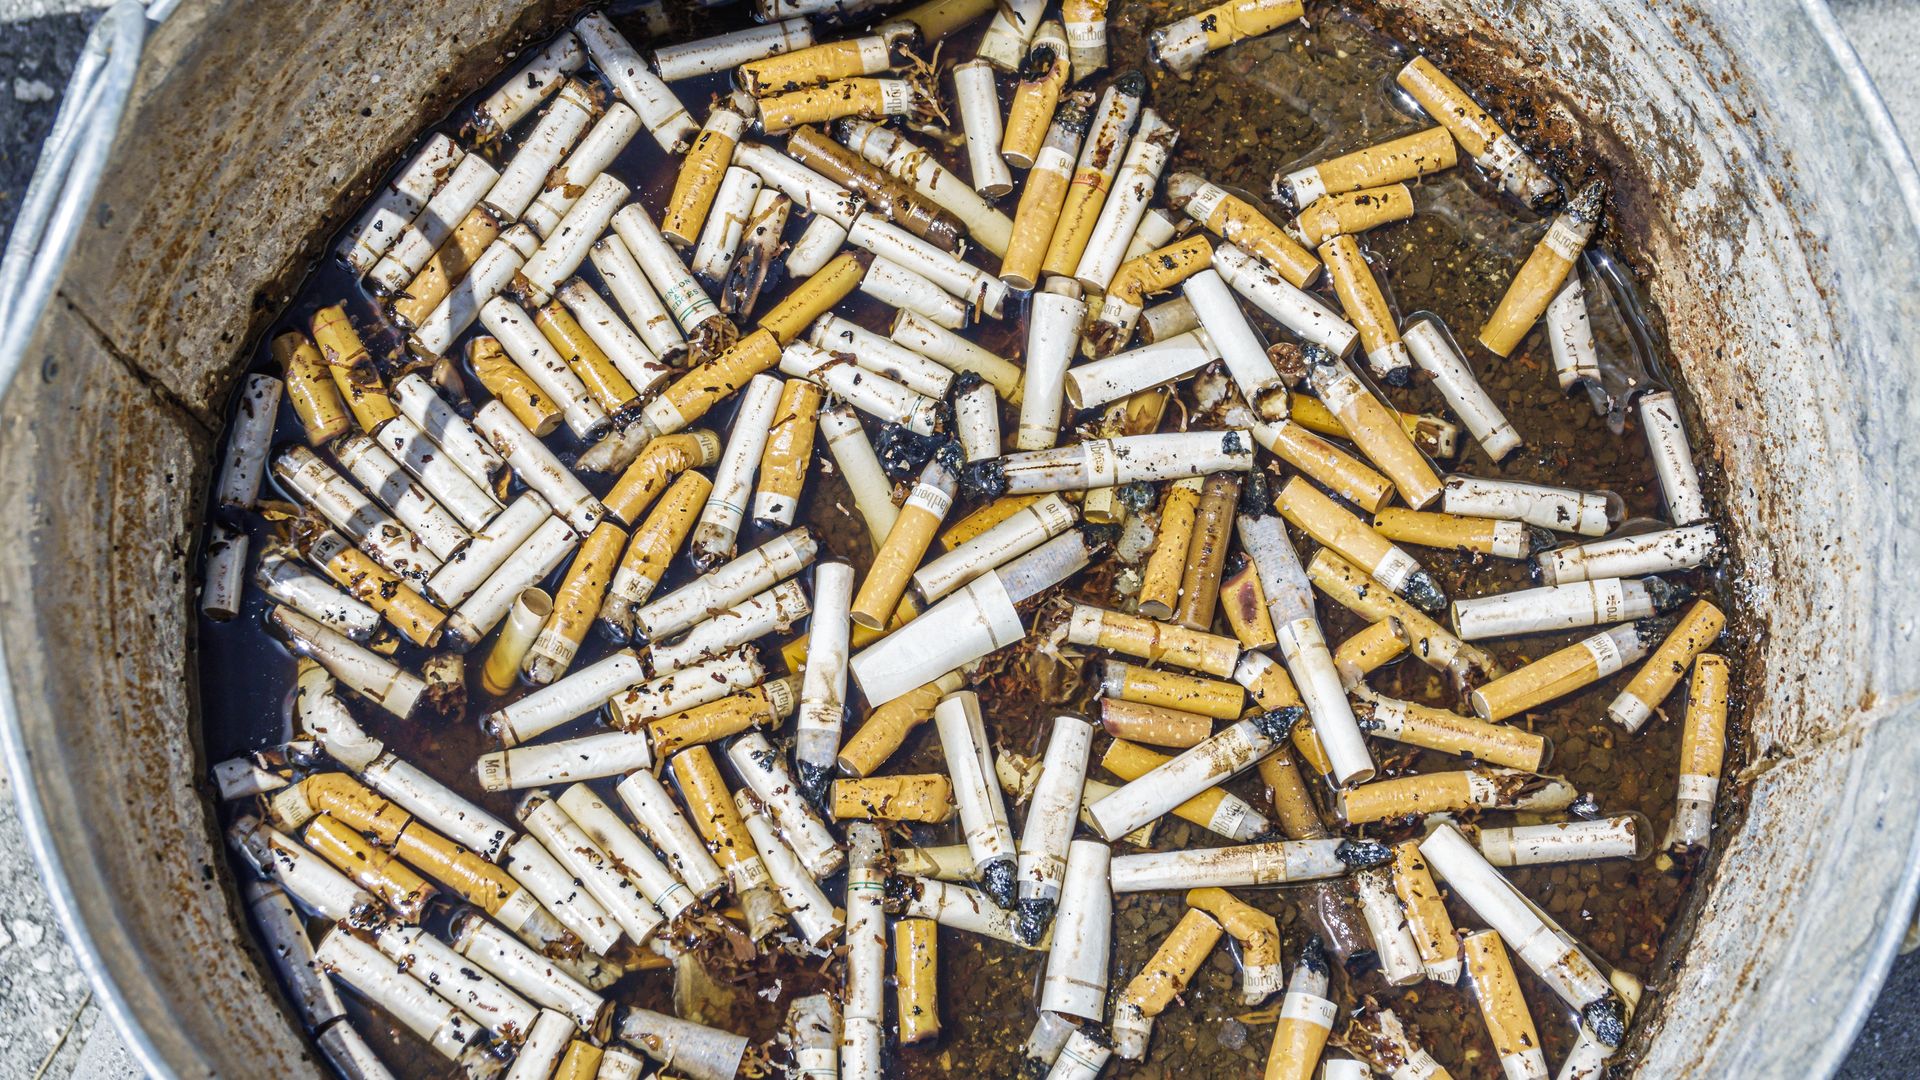 Florida, Arcadia, floating cigarette butts in bucket